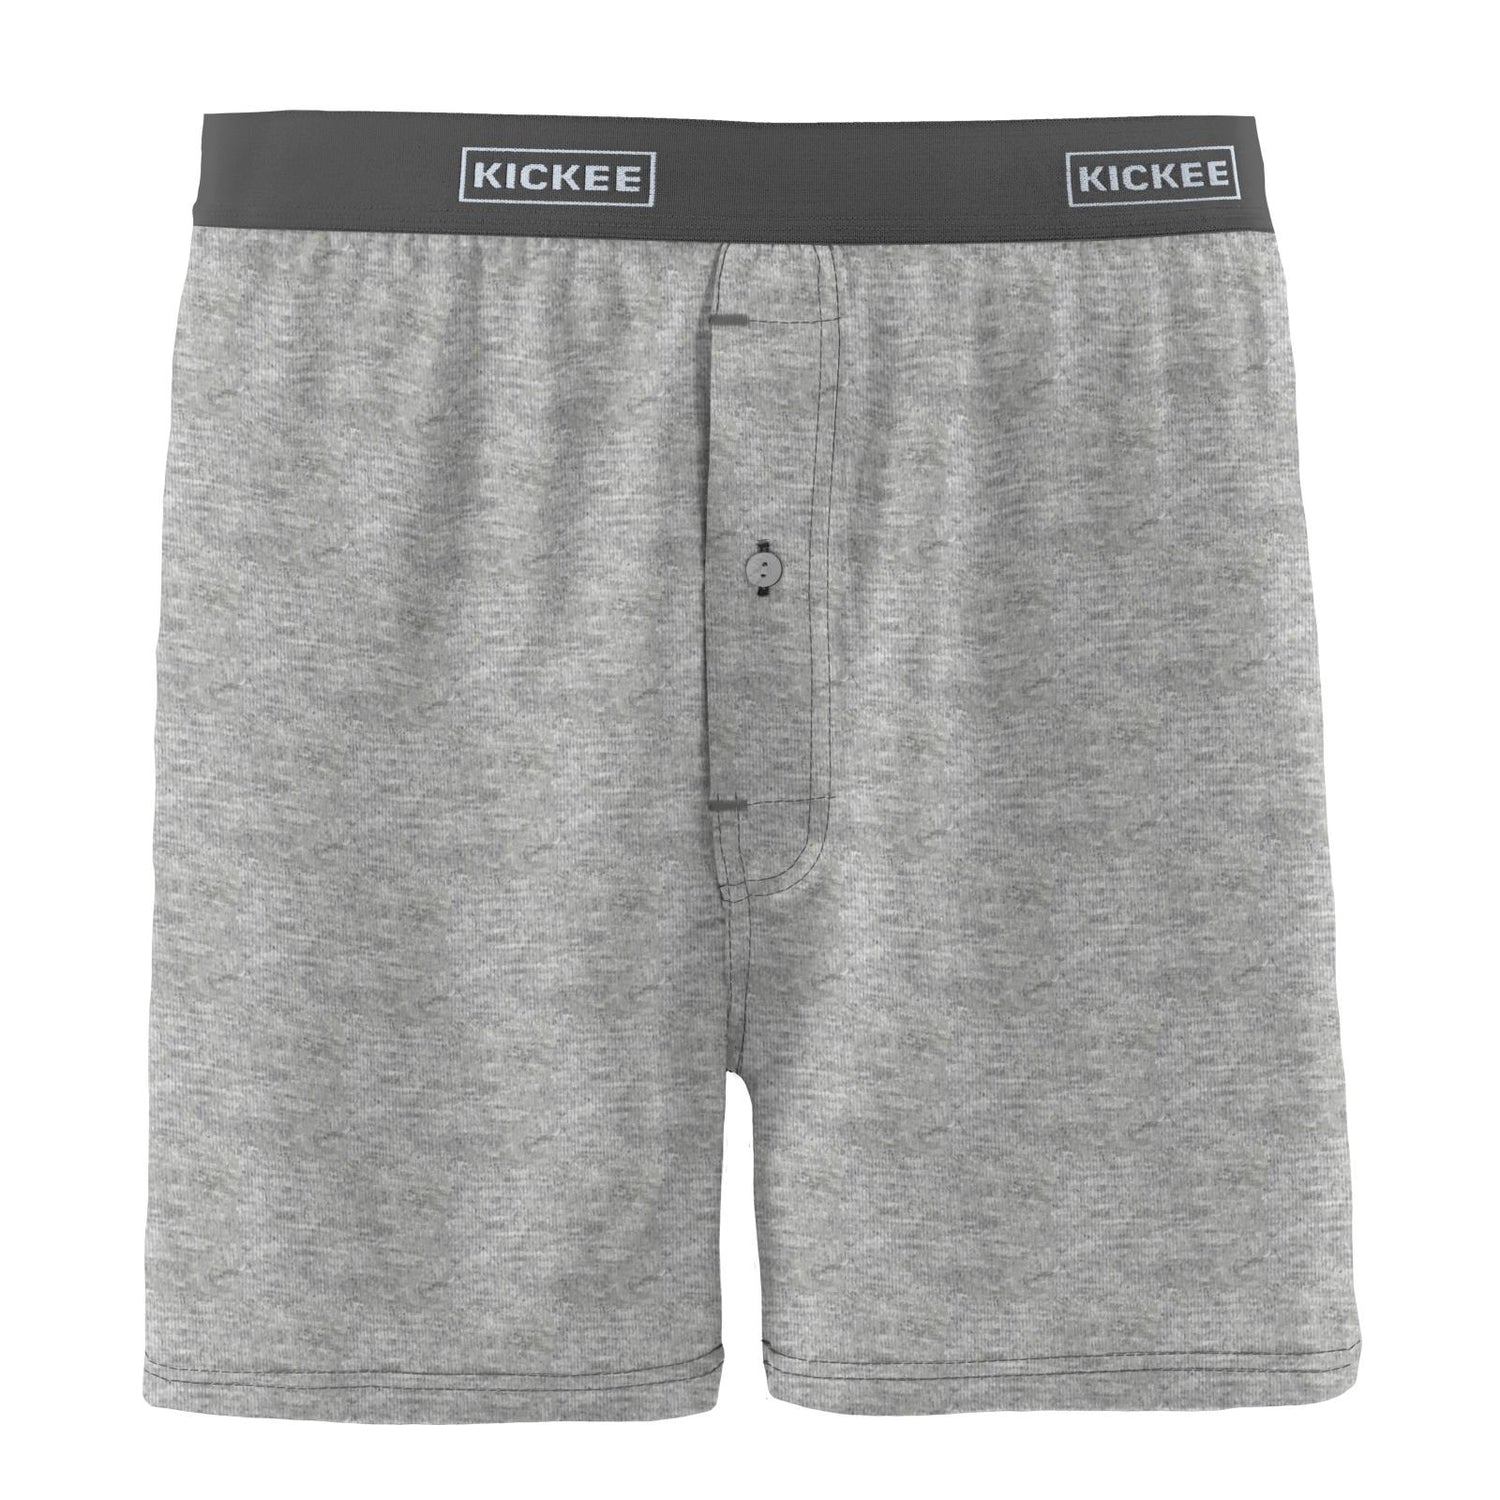 Men's Boxer Shorts in Heathered Mist